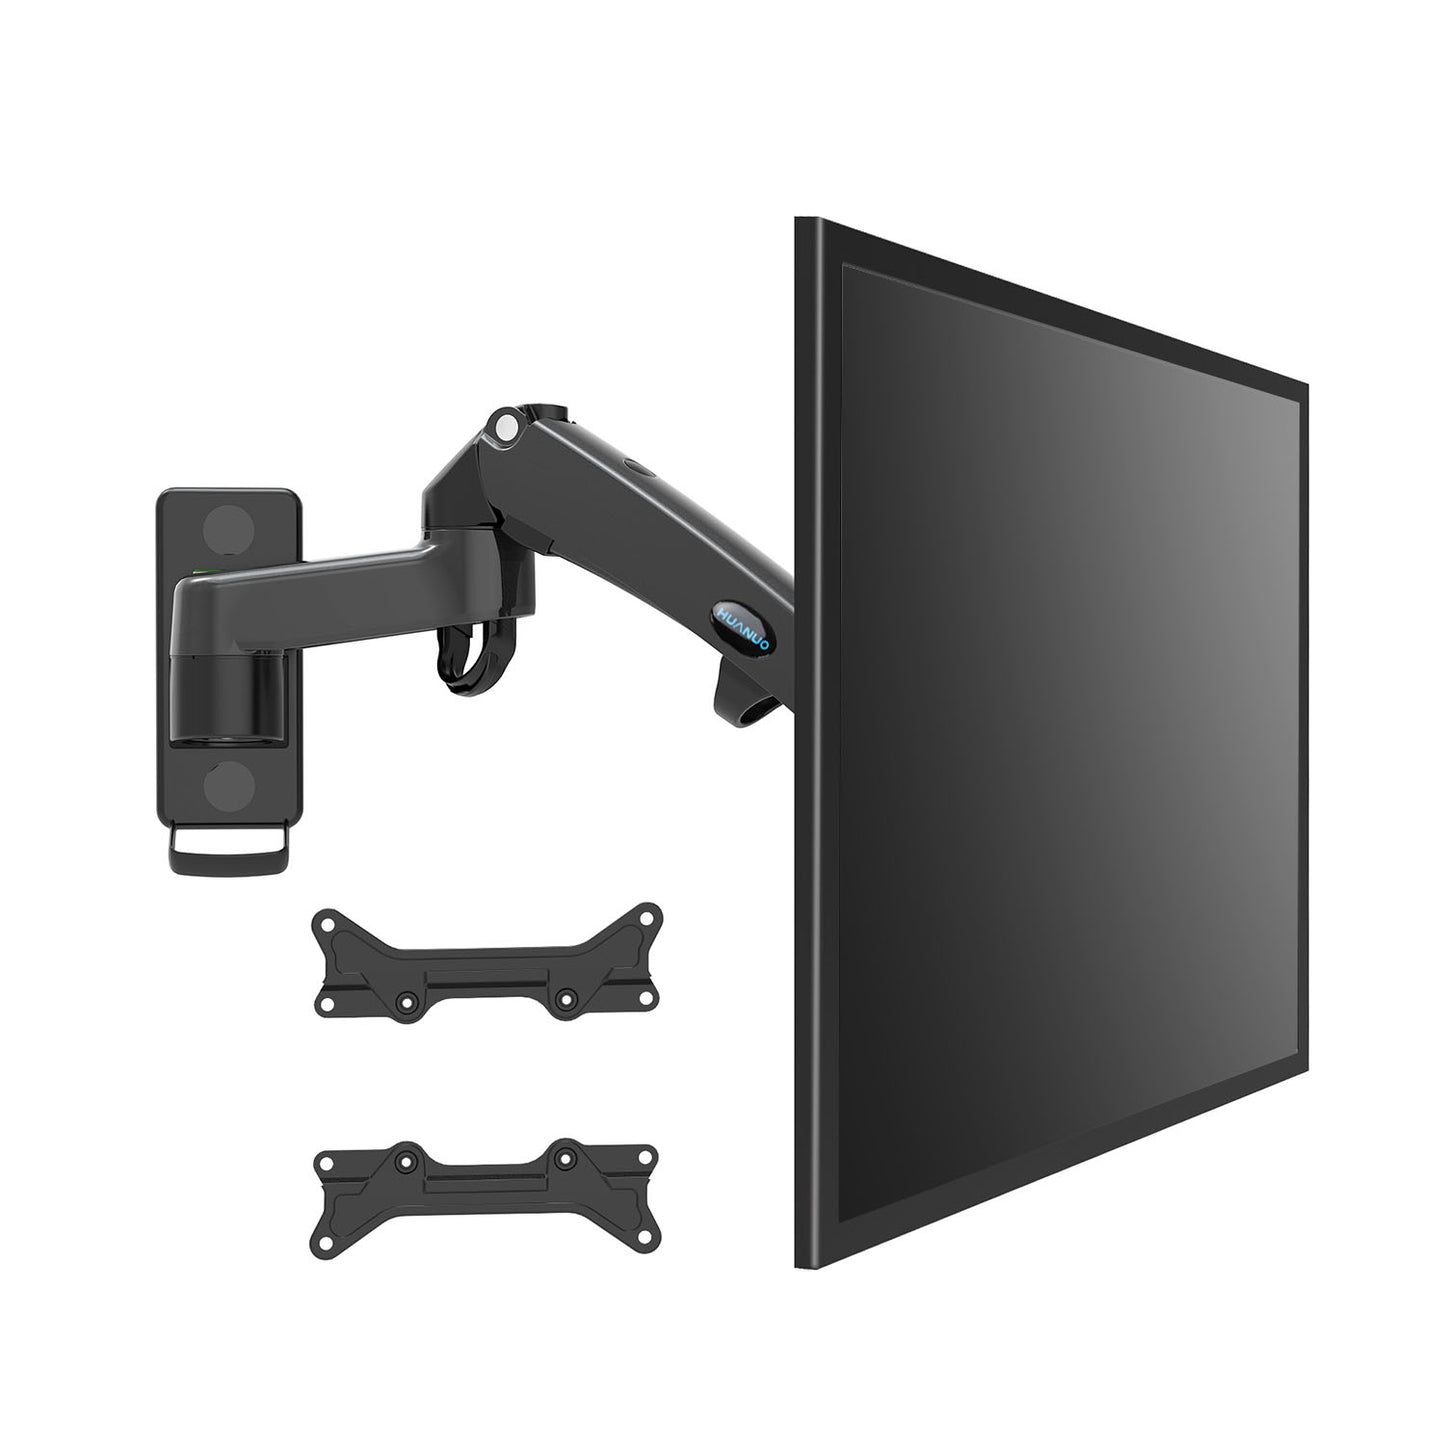 Monitor Wall Mount For 24" To 35" Screens